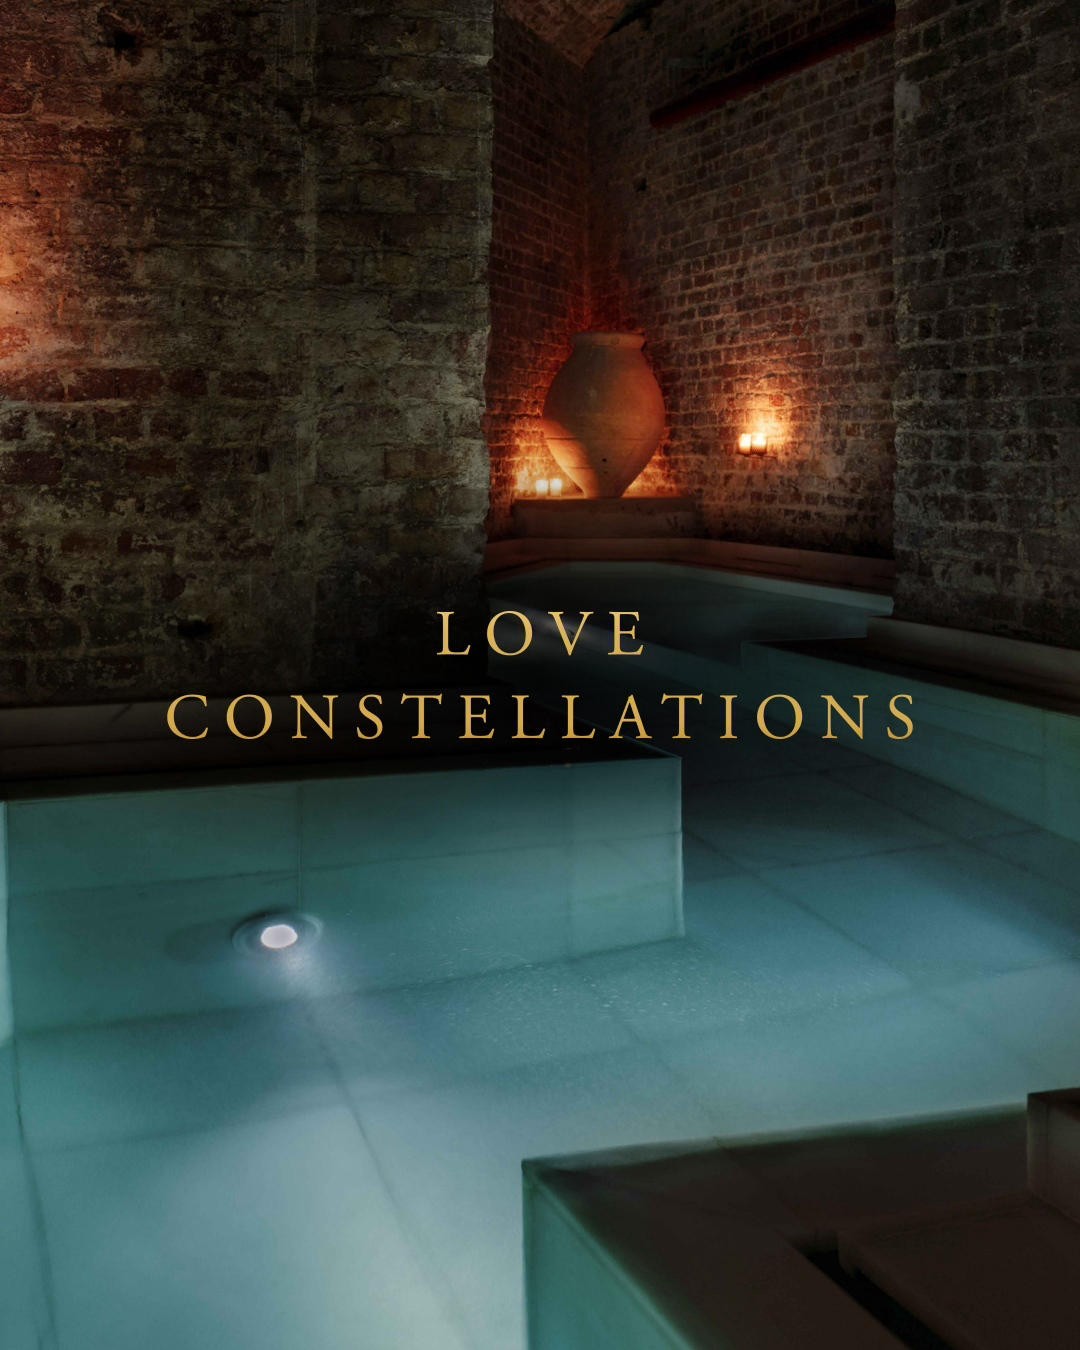 Our Valentine’s Day Event, Love Constellations, is just over a week away and we have plenty of surpr